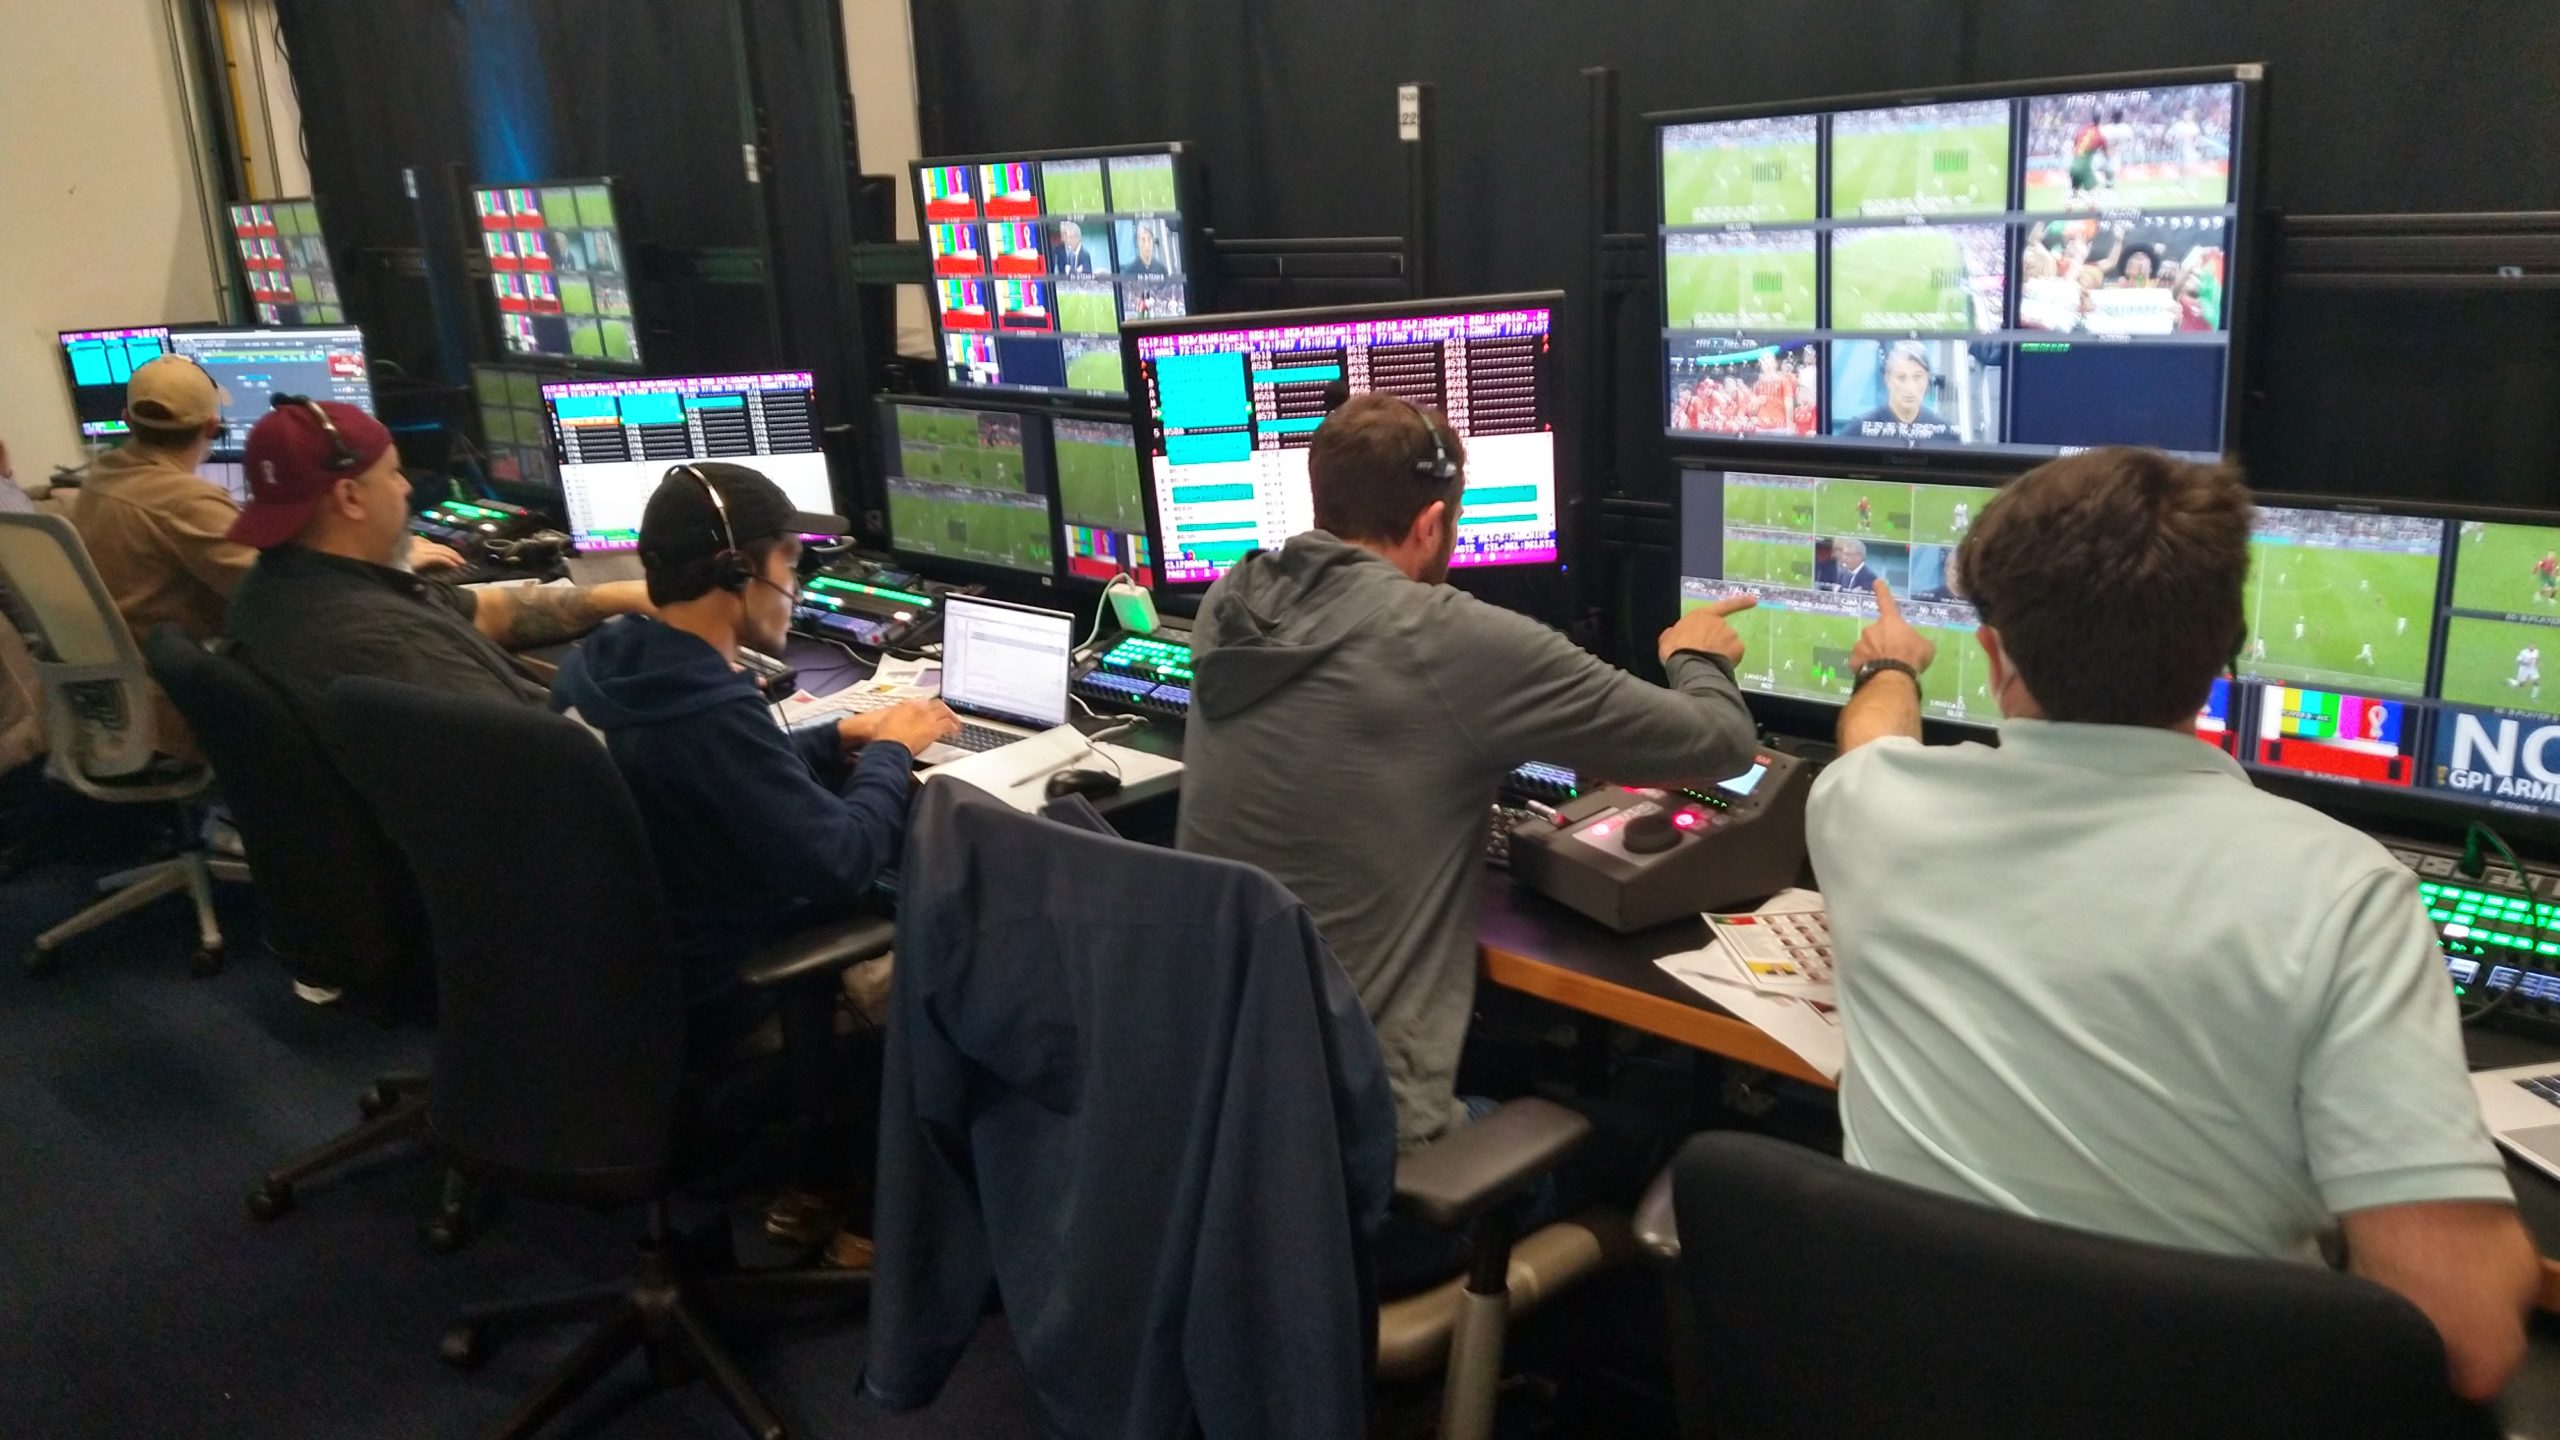 Live From FIFA World Cup Inside Fox Sports Remote Production Ops at Pico Blvd